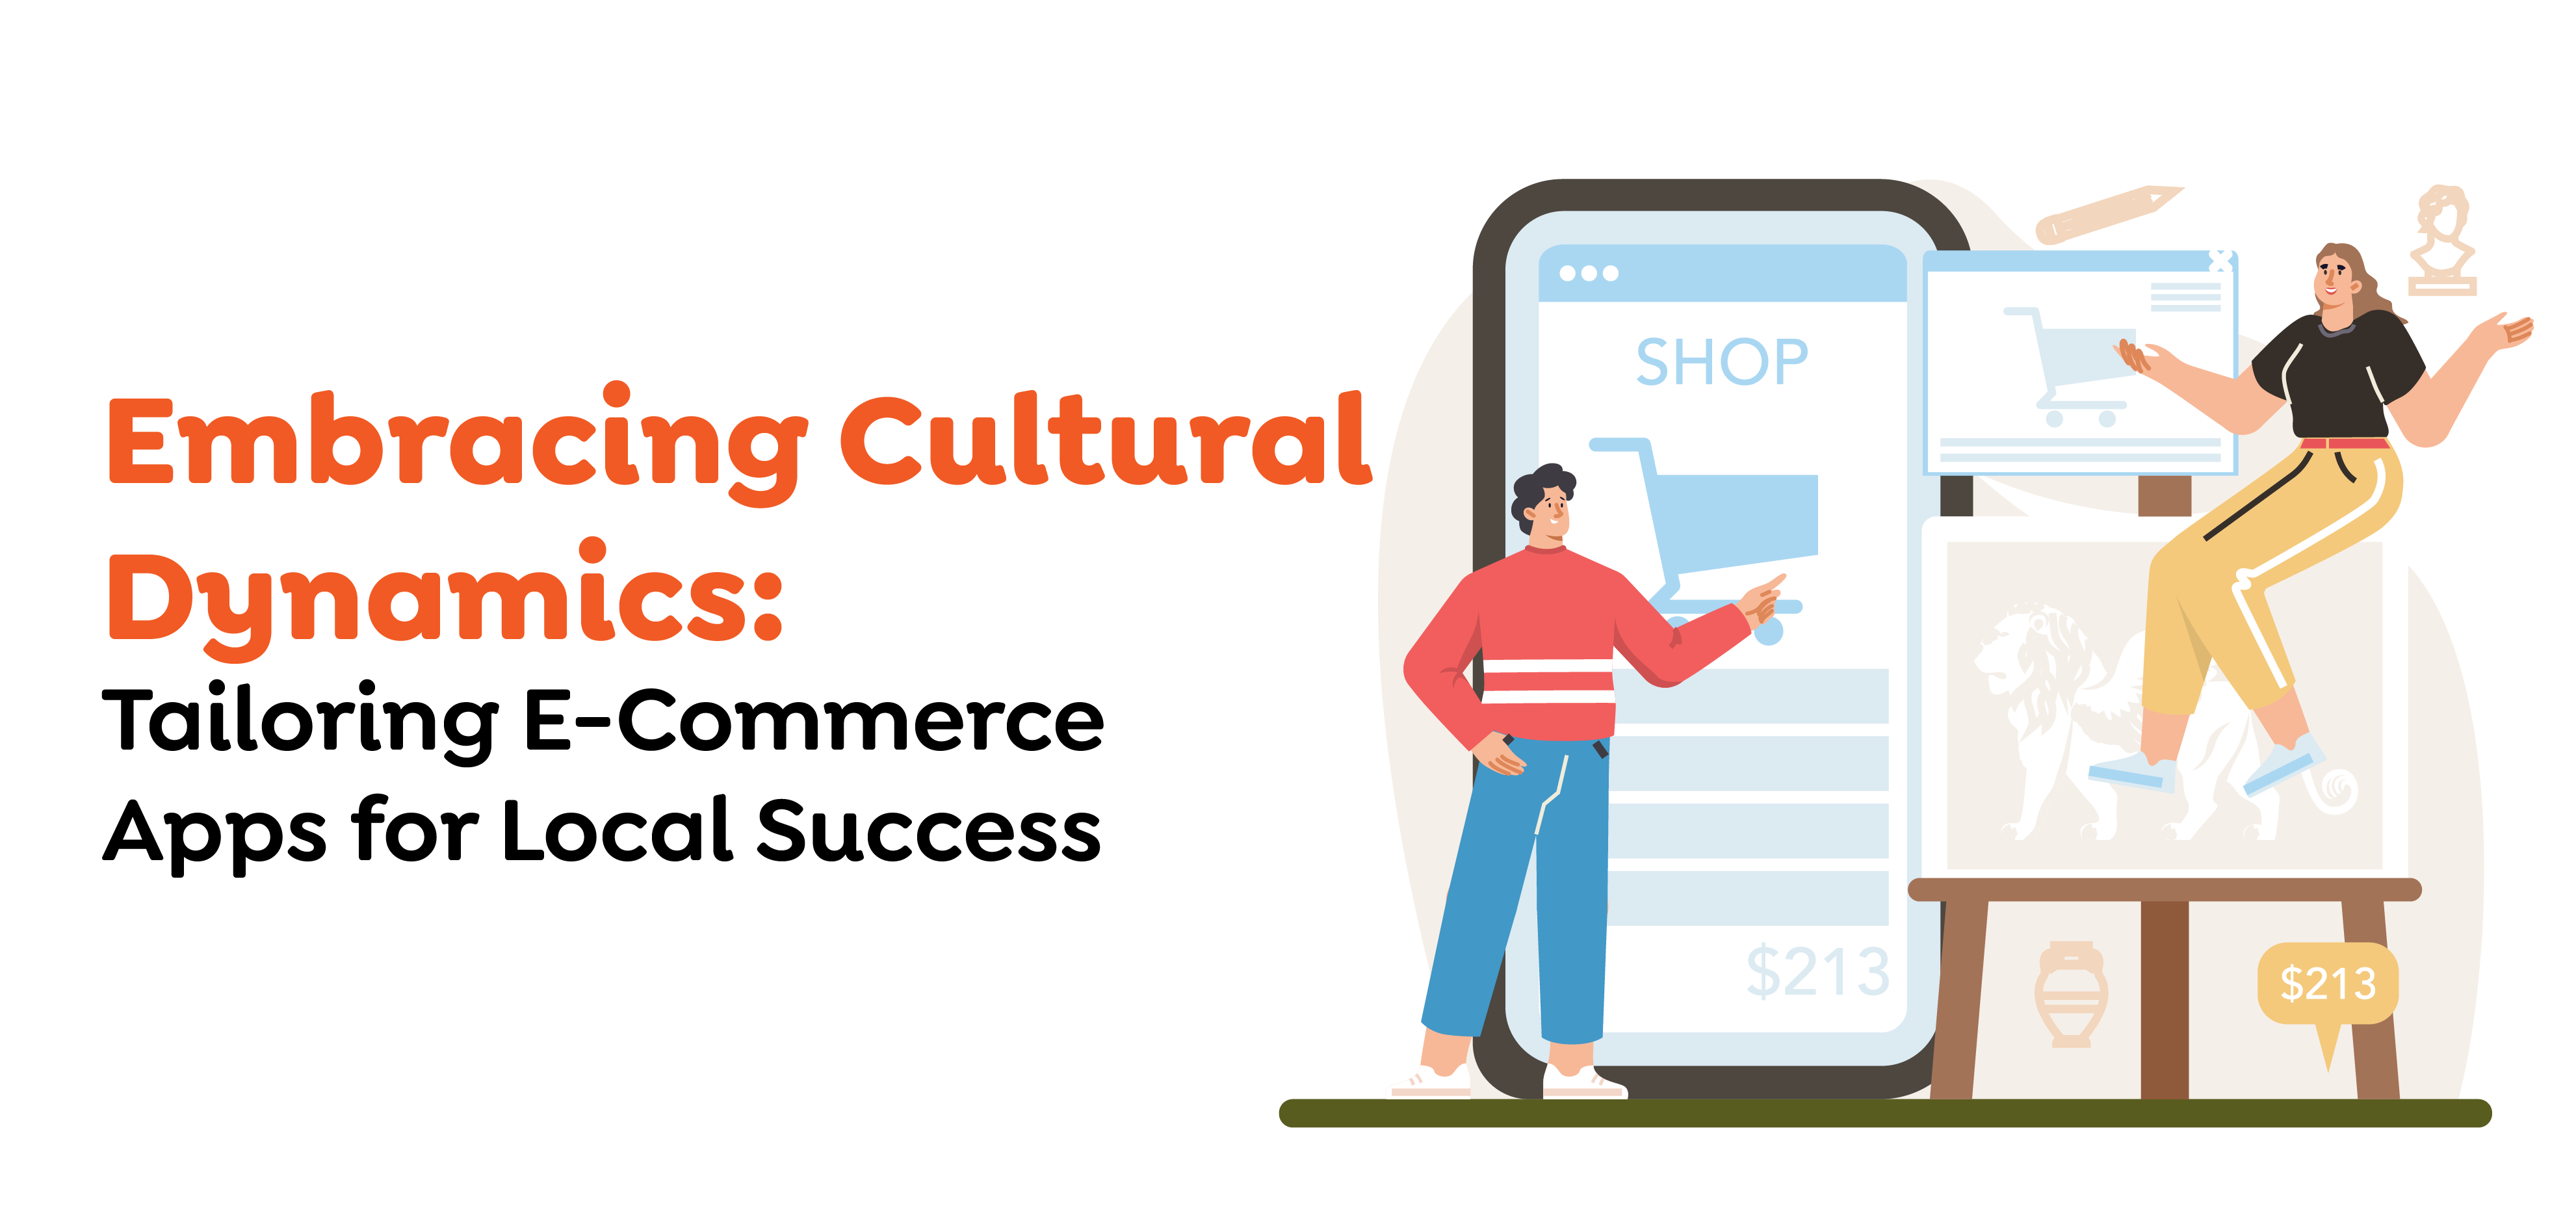 Embracing Cultural Dynamics- Tailoring E-Commerce Apps for Local Success